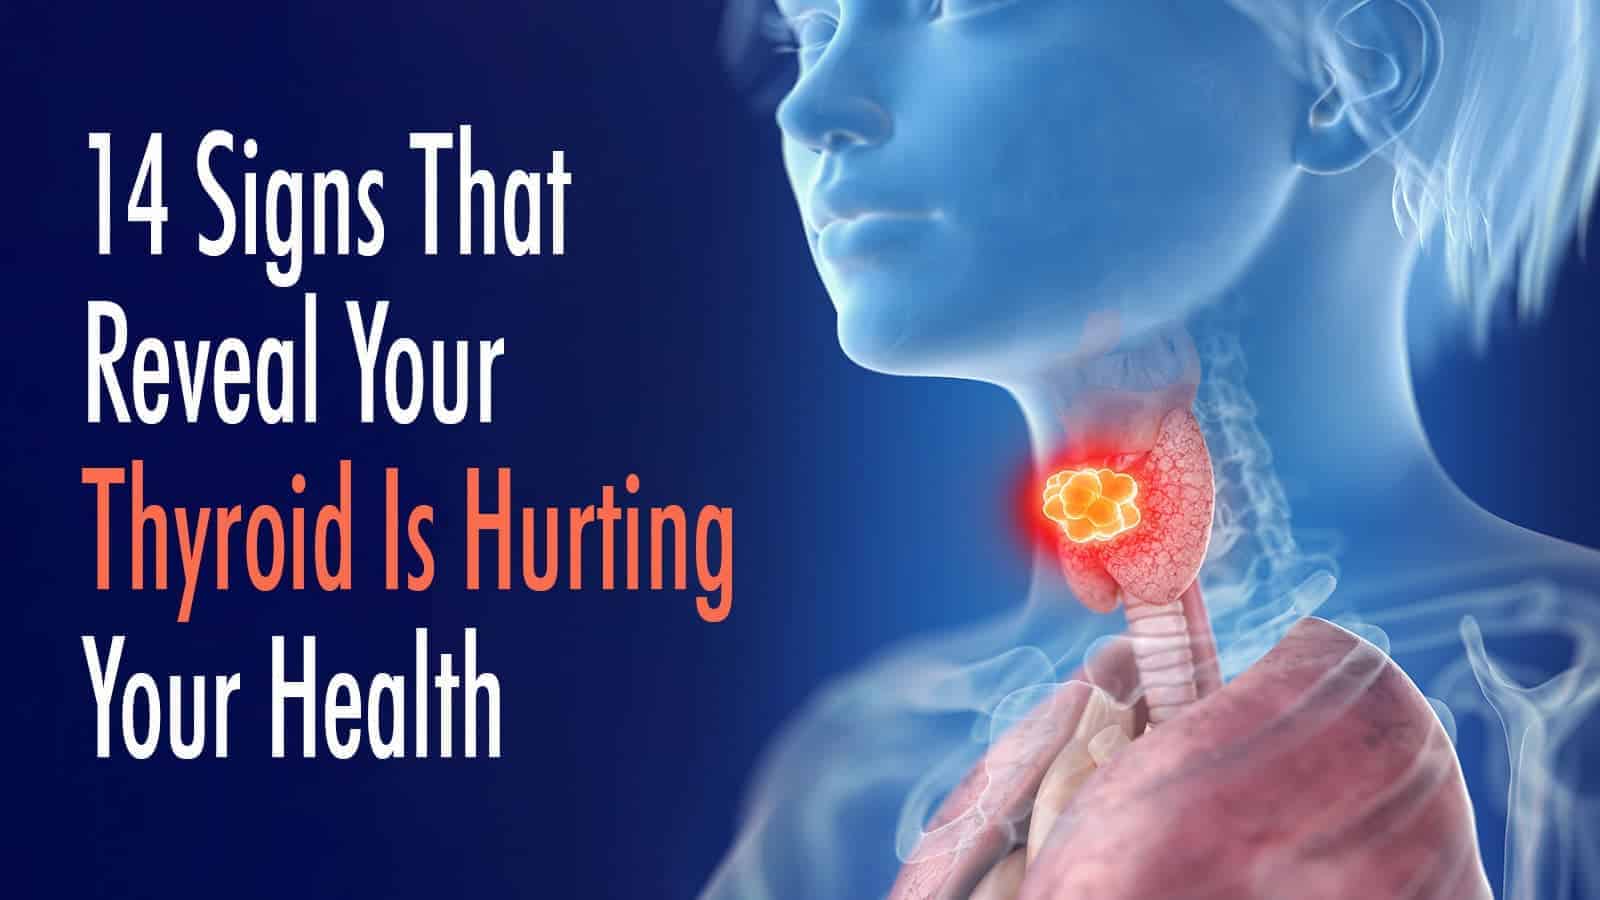 14 Signs That Reveal Your Thyroid Is Hurting Your Health